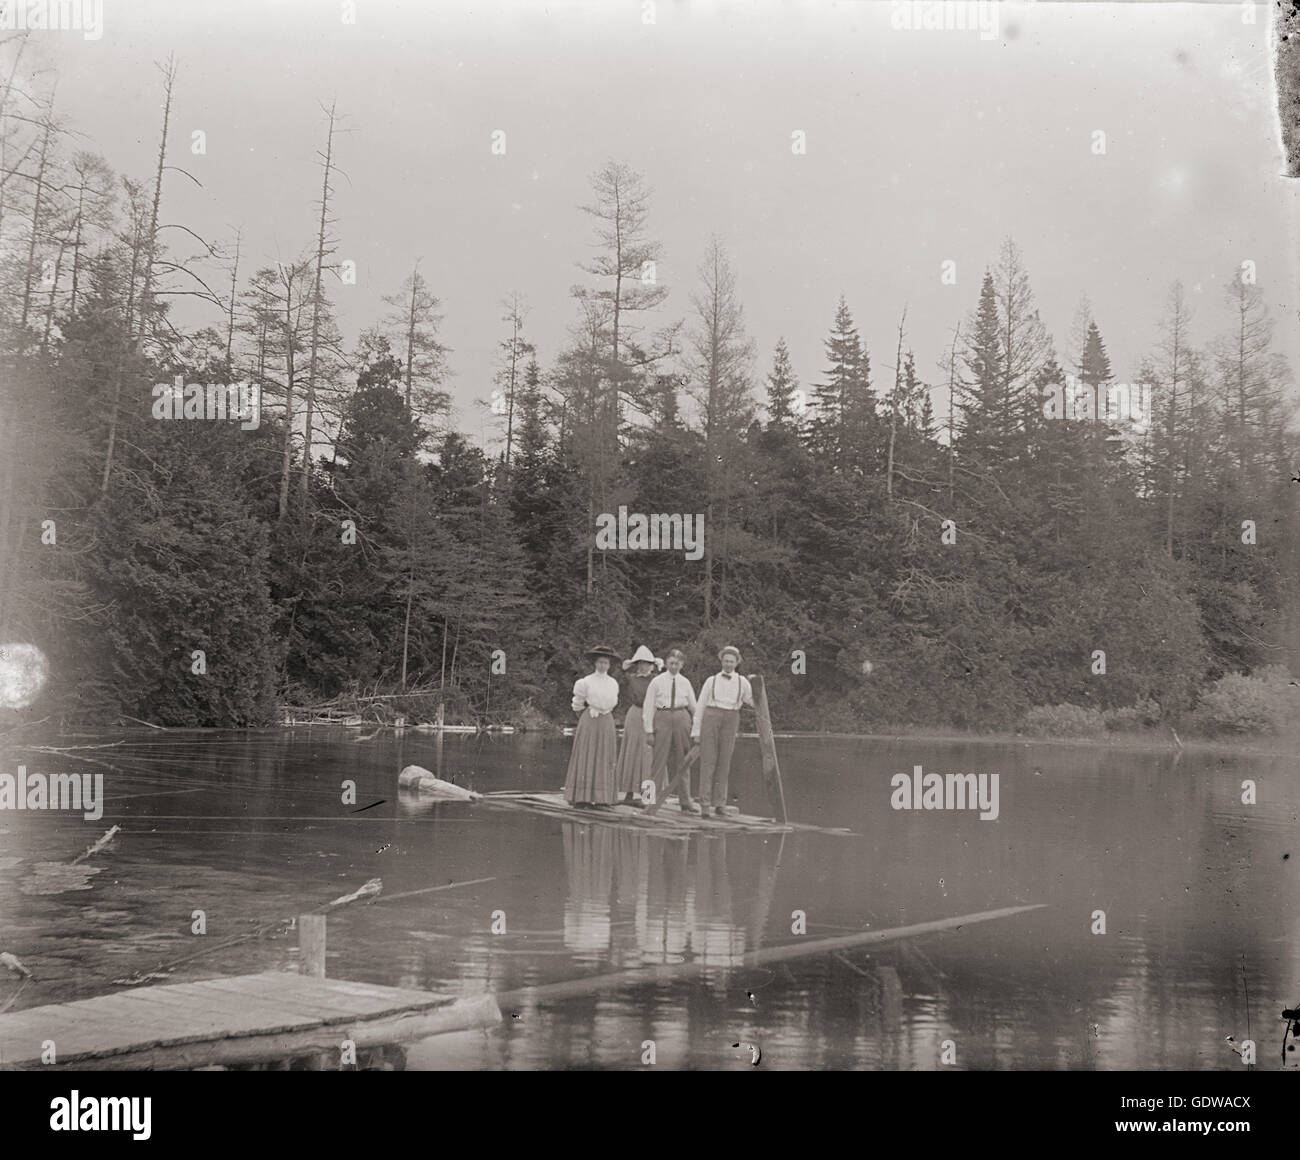 Antique c1900 late Victorian photograph, two men and two women on a raft in a pond. Location: Michigan, USA. SOURCE: ORIGINAL PHOTOGRAPHIC NEGATIVE. Stock Photo